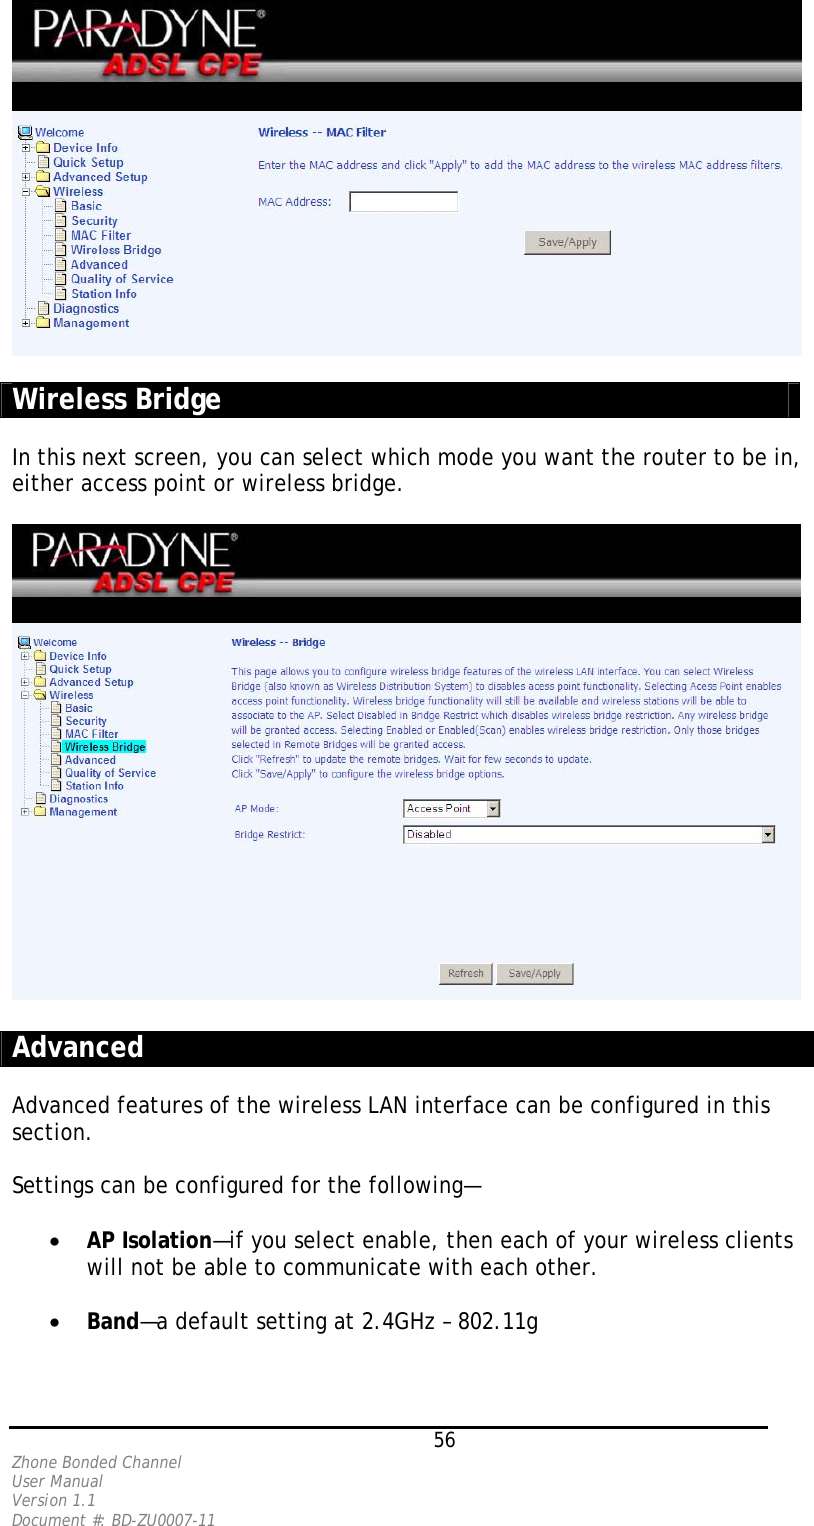   Wireless Bridge  In this next screen, you can select which mode you want the router to be in, either access point or wireless bridge.    Advanced  Advanced features of the wireless LAN interface can be configured in this section.   Settings can be configured for the following—  •  AP Isolation—if you select enable, then each of your wireless clients will not be able to communicate with each other.  •  Band—a default setting at 2.4GHz – 802.11g    56 Zhone Bonded Channel User Manual  Version 1.1 Document #: BD-ZU0007-11 